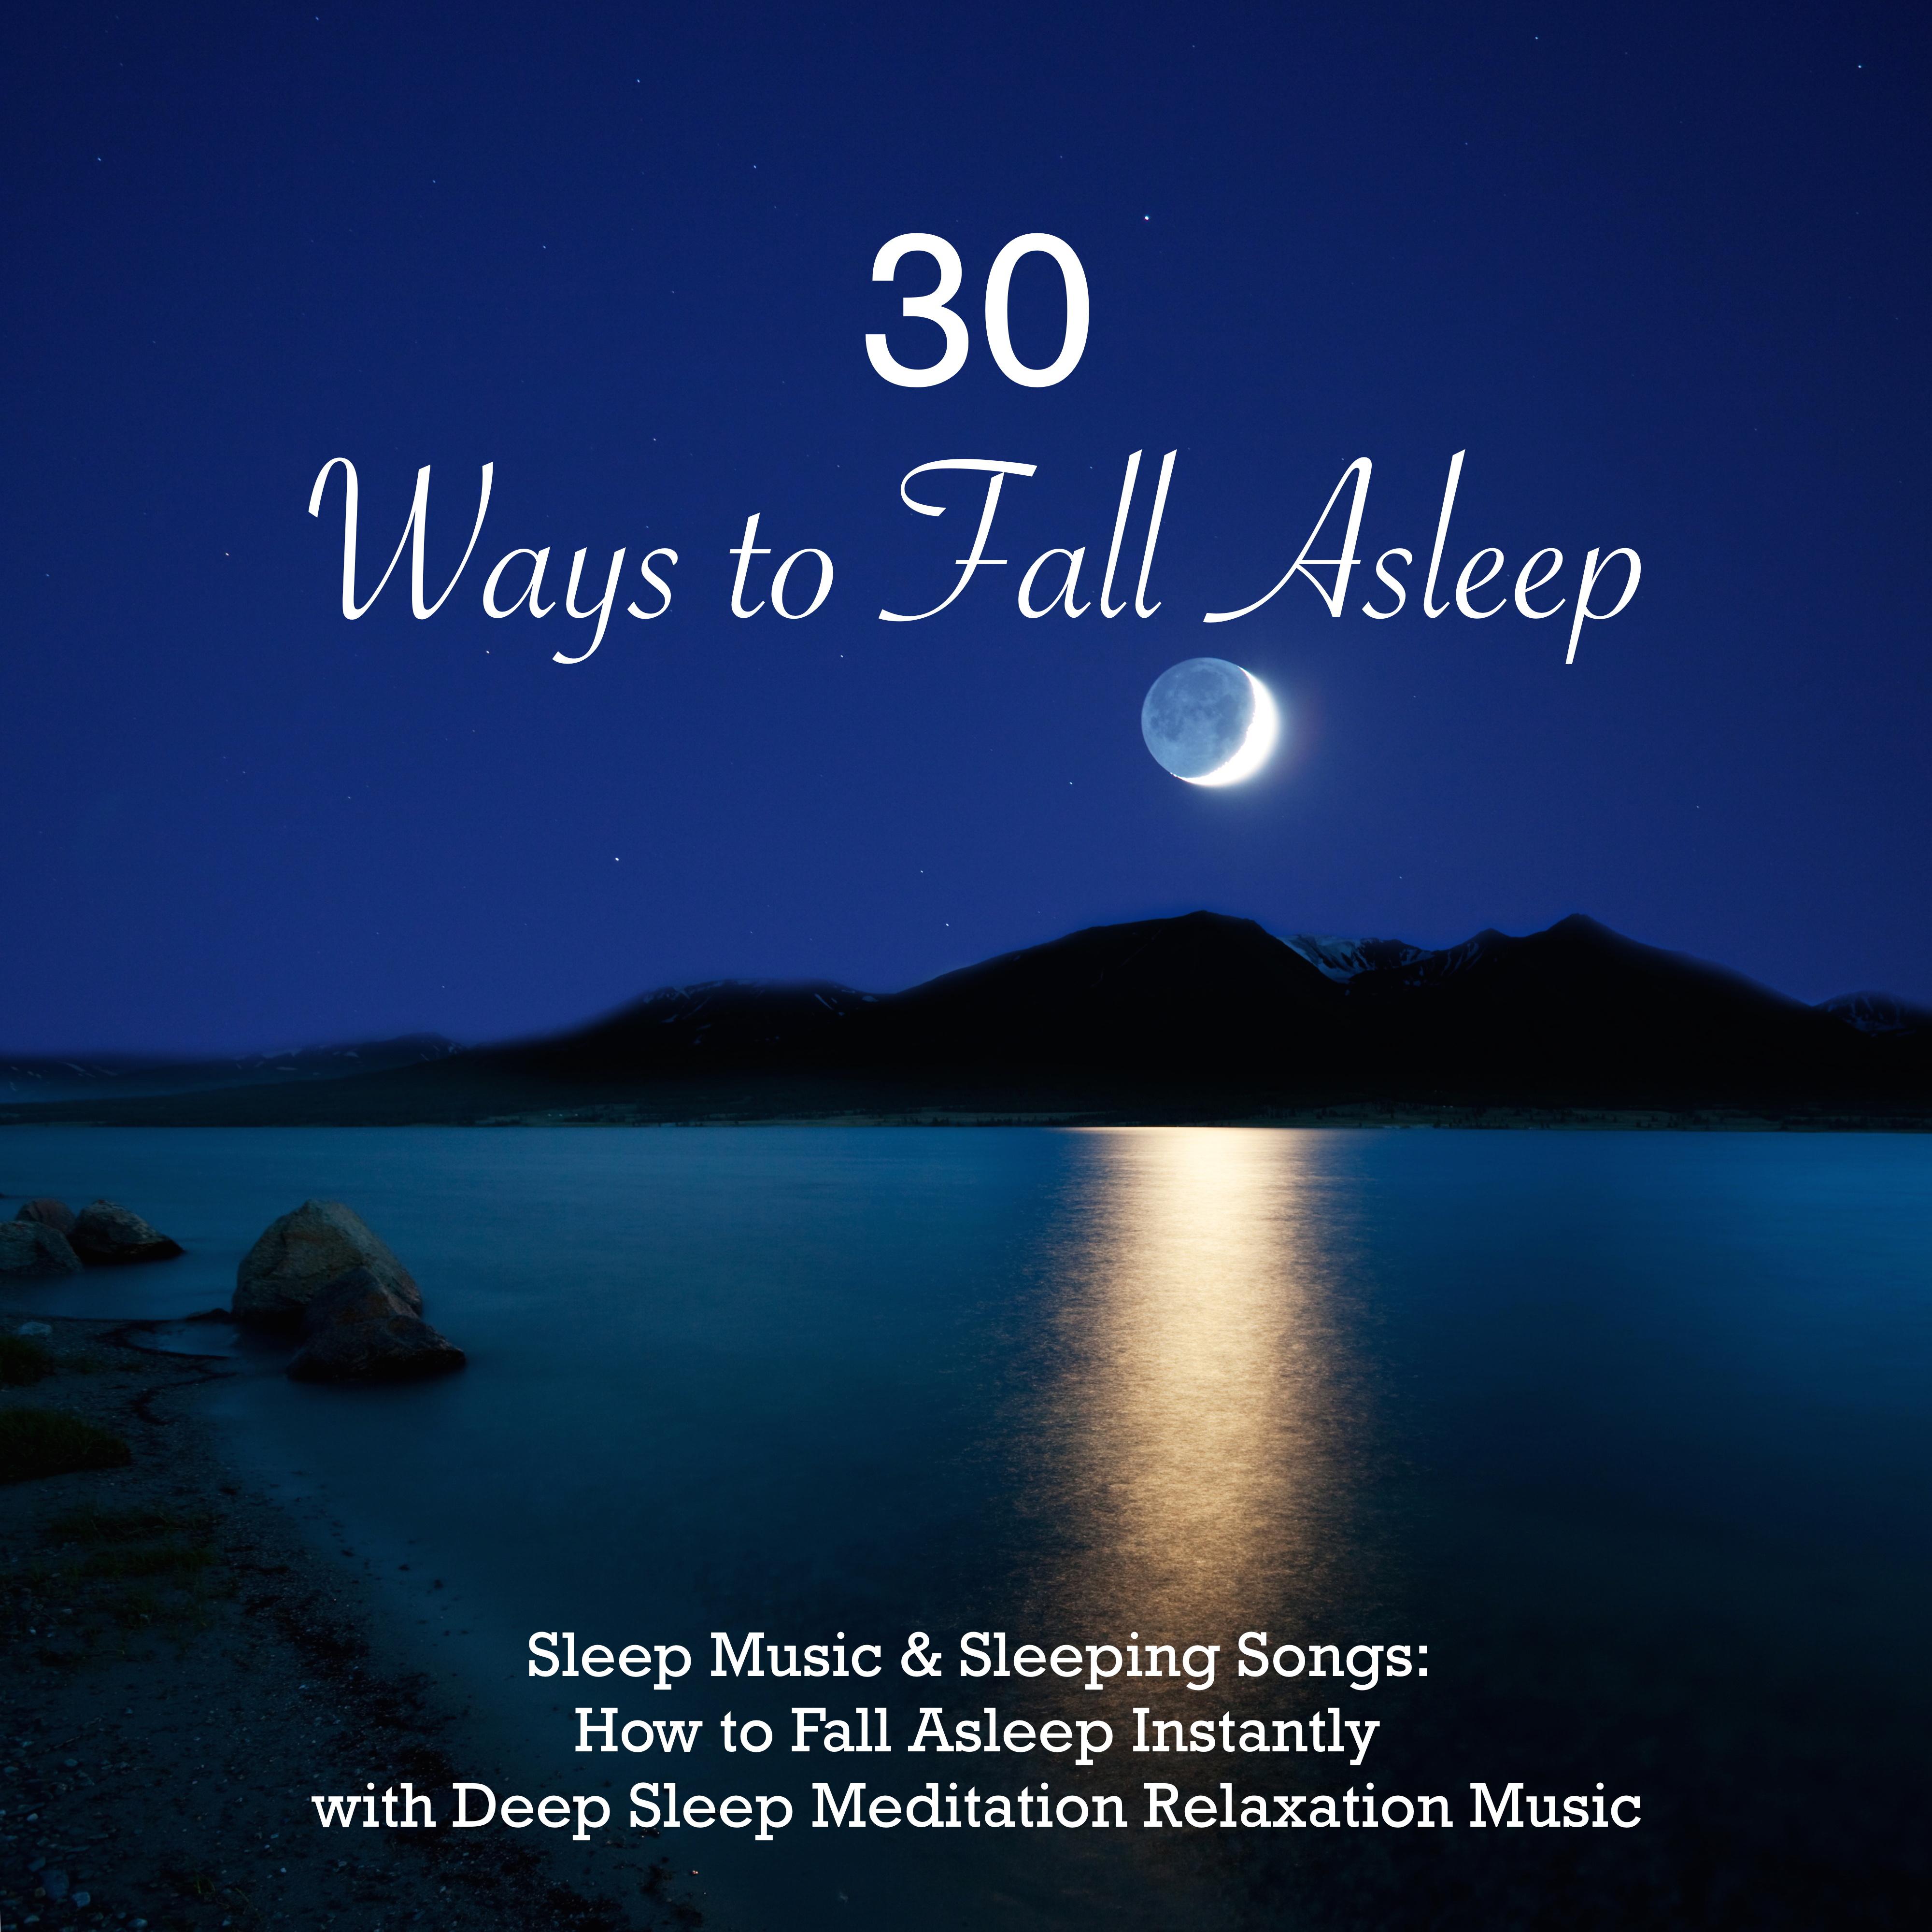 Sleep Doctor for Anxiety Relief with Gentle Beautiful Music